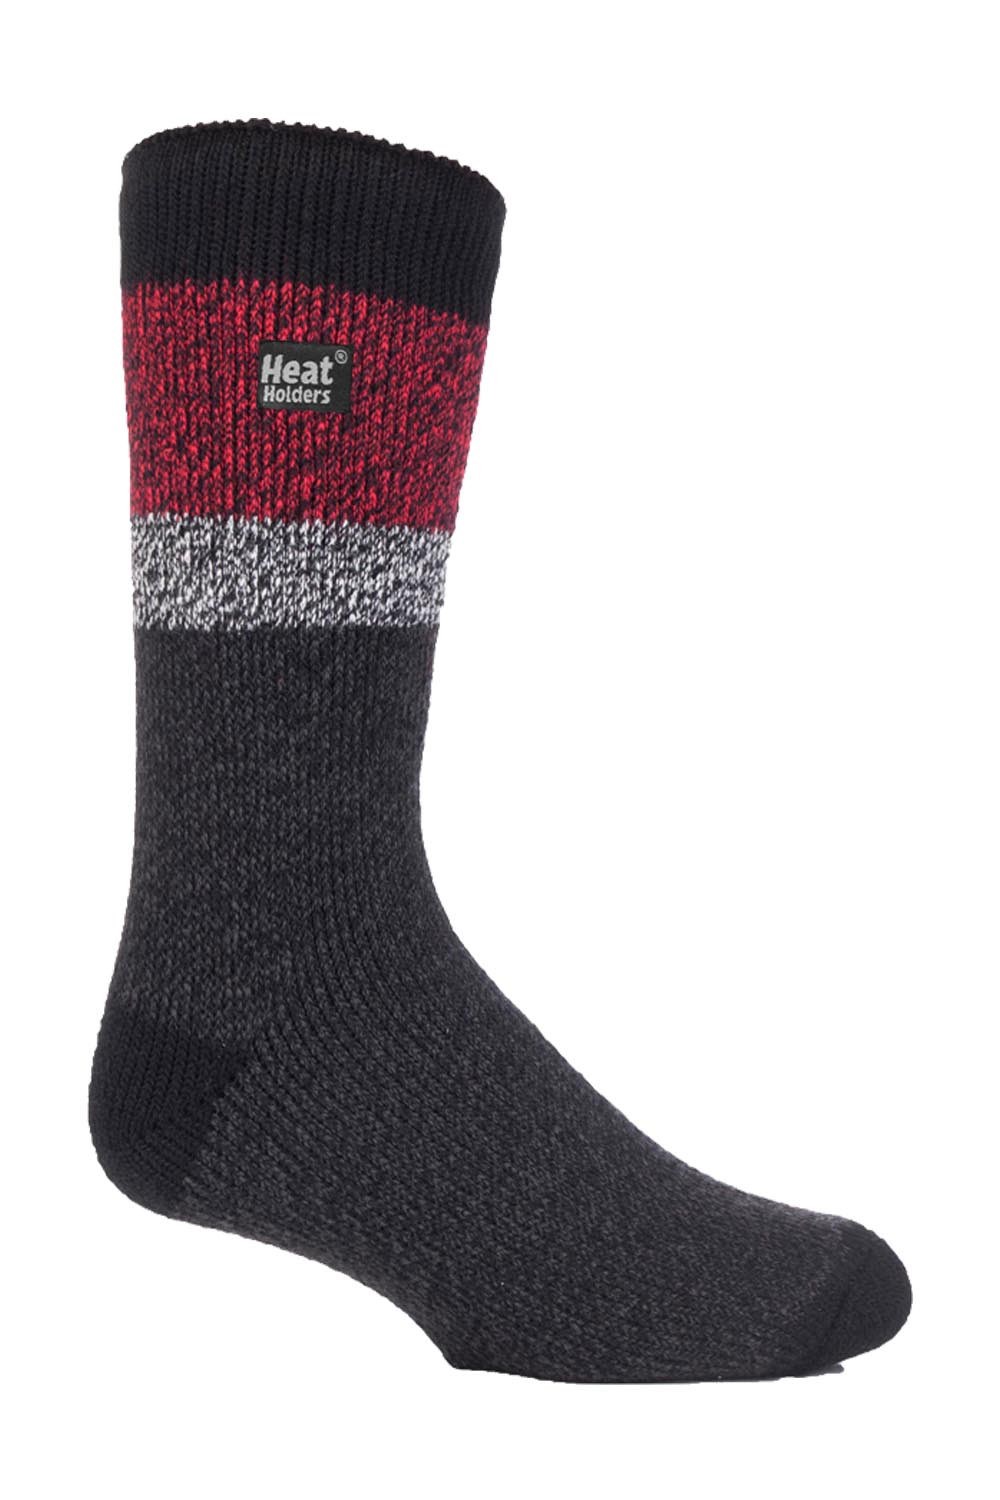 Mens Thick Patterned Thermal Socks -